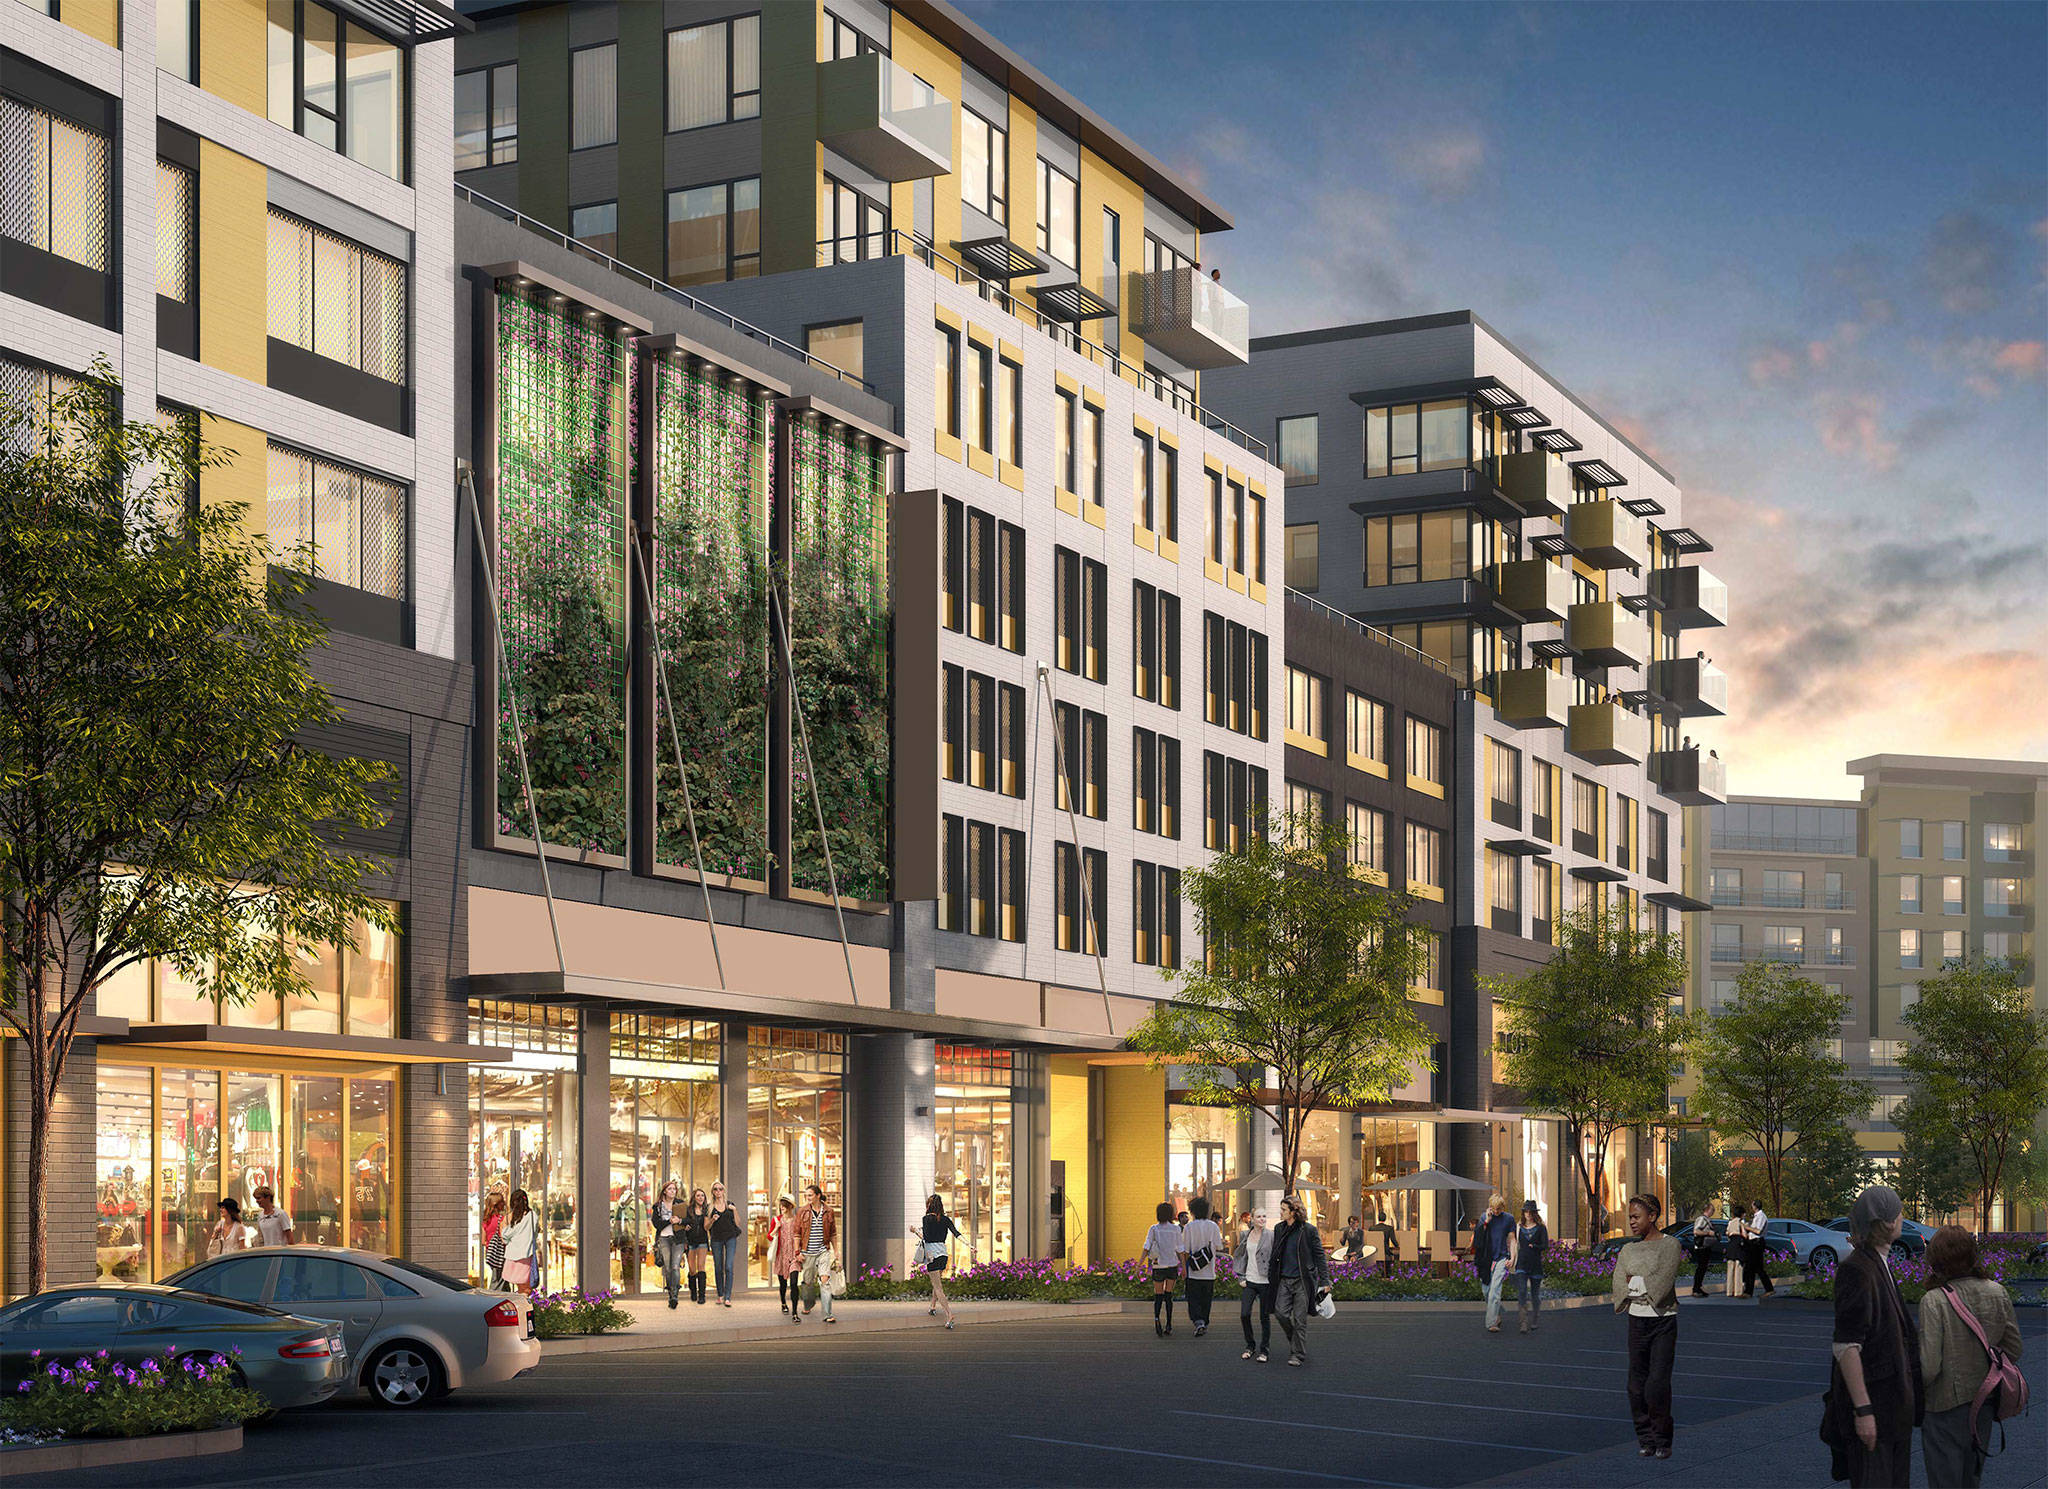 An artist’s rendering shows what the Village at Totem Lake, a mixed-use development including retail and residential space, is planned to look like. CenterCal/Submitted art